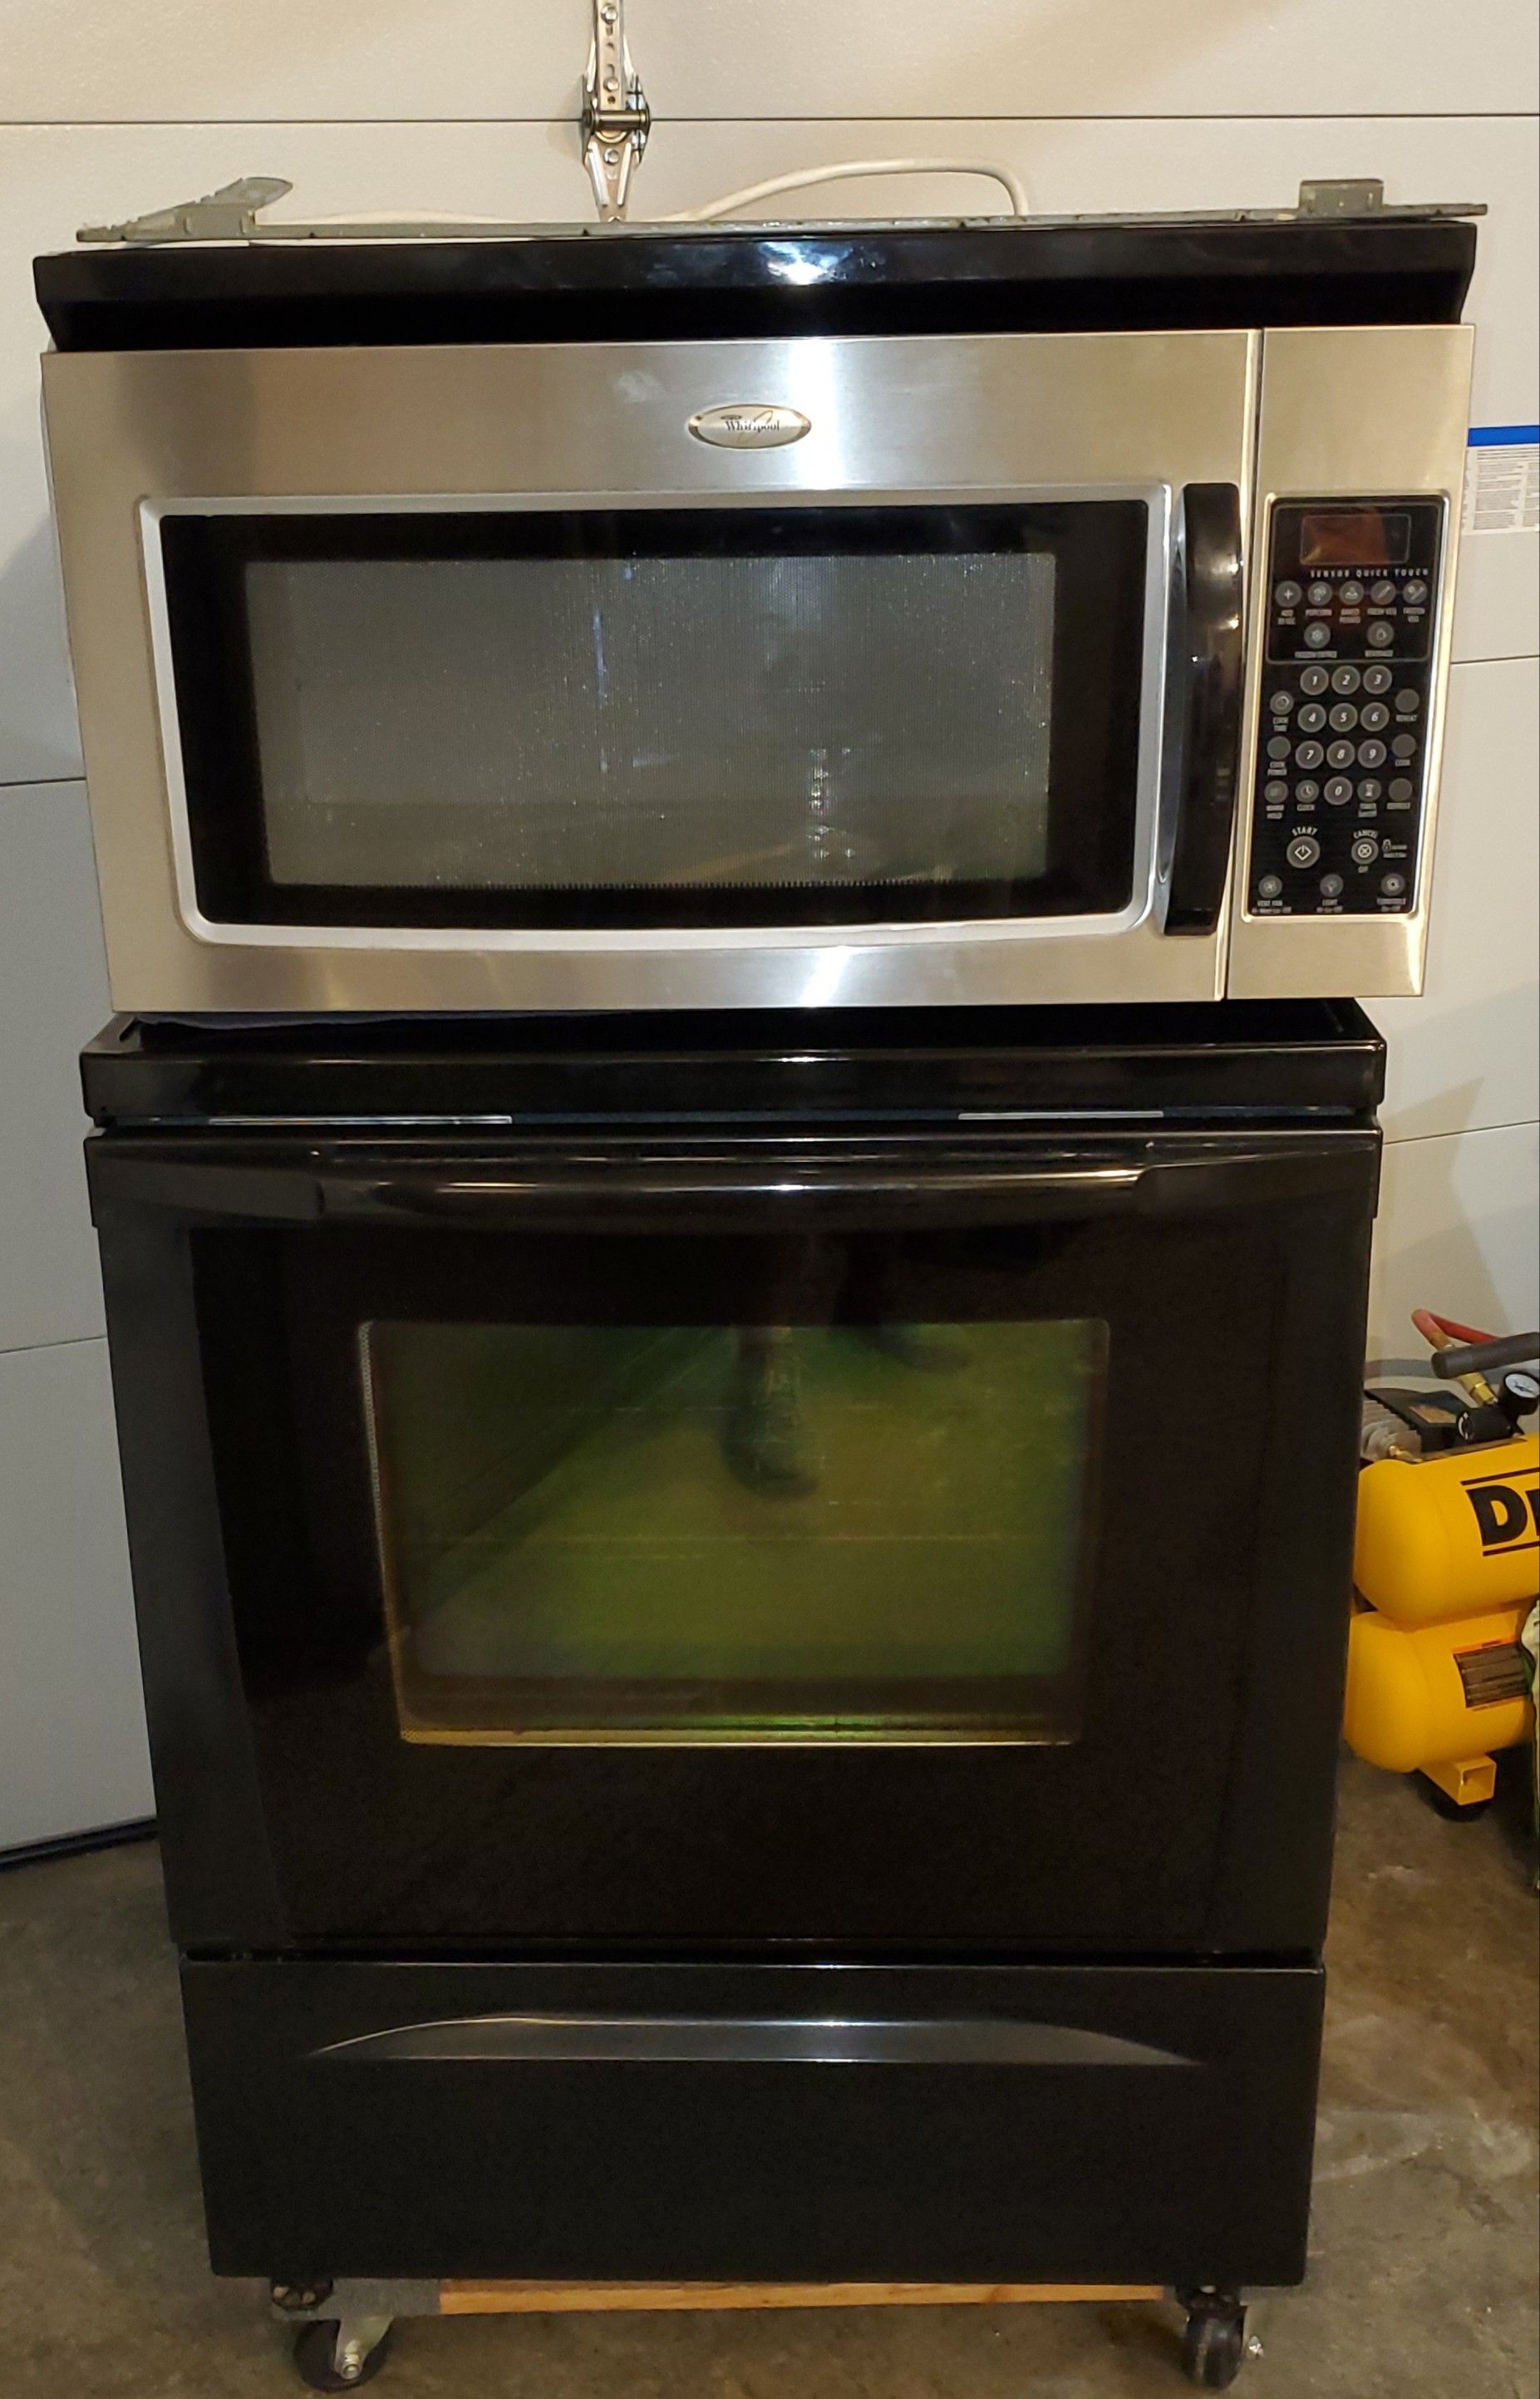 Whirlpool gold stove and microwave